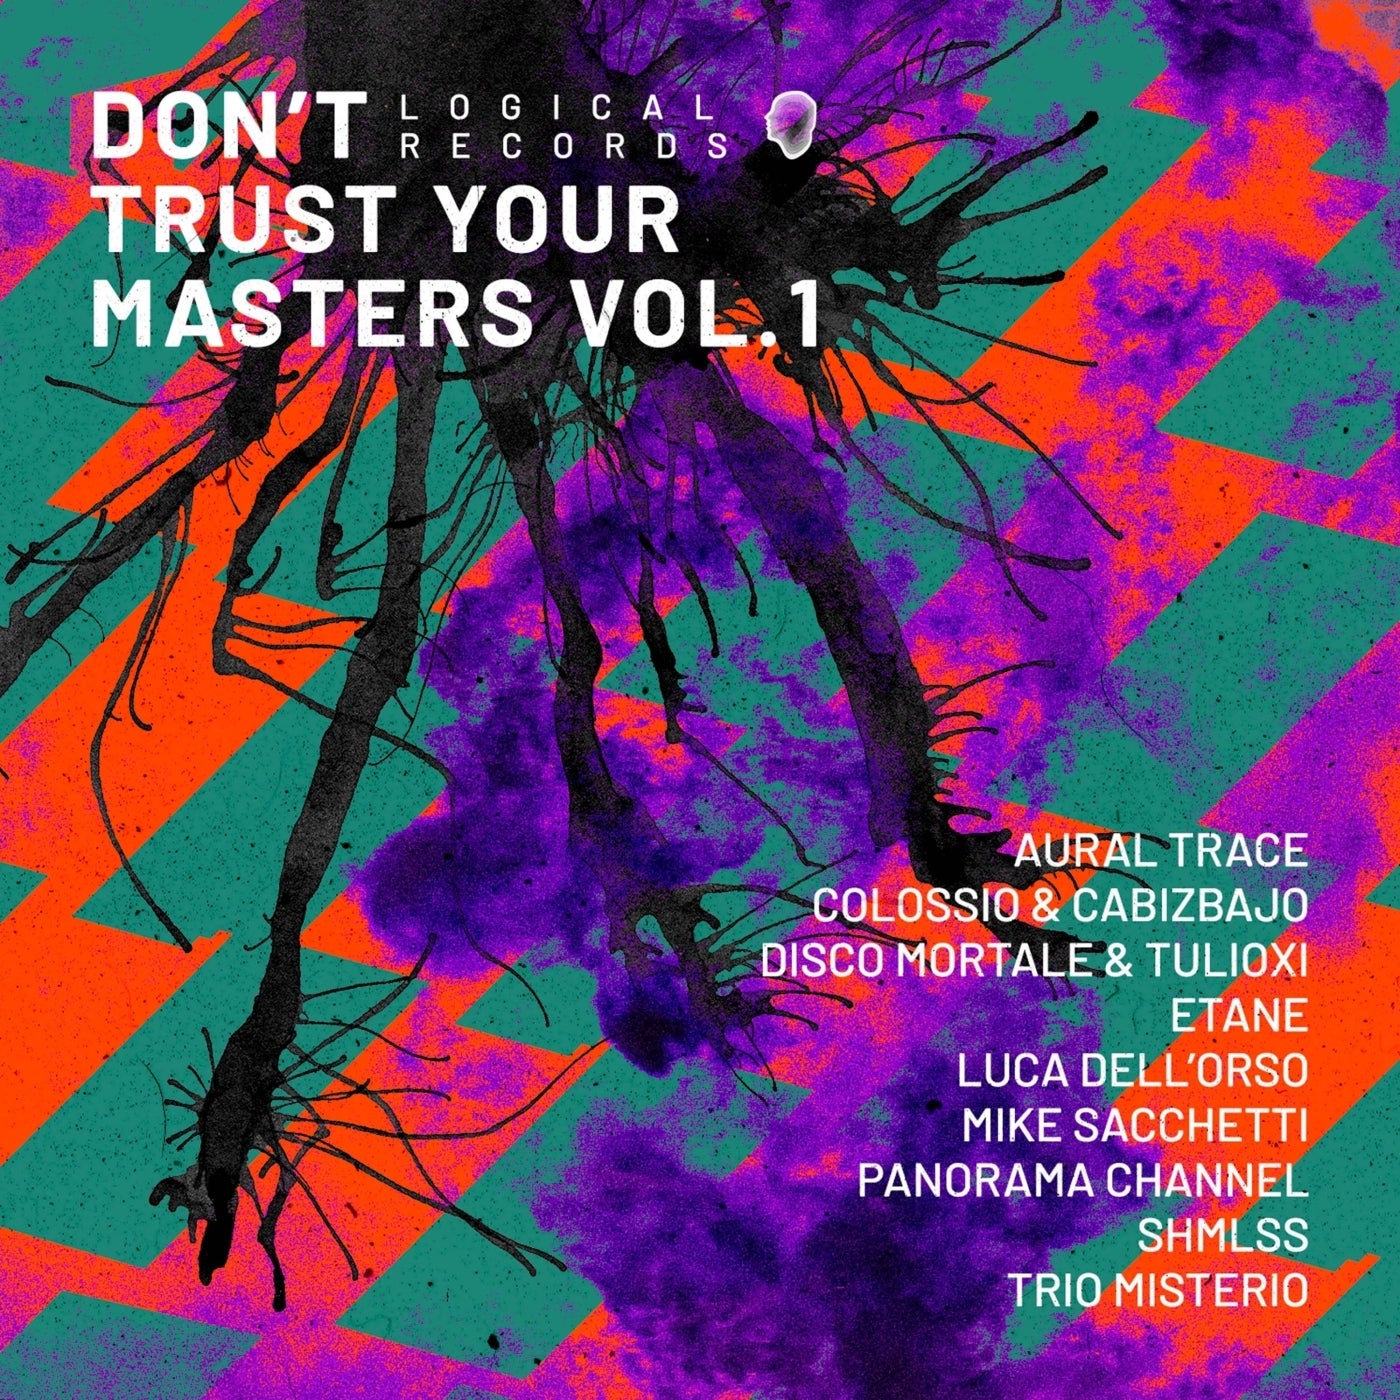 "Don't Trust Your Masters, Vol. 1"